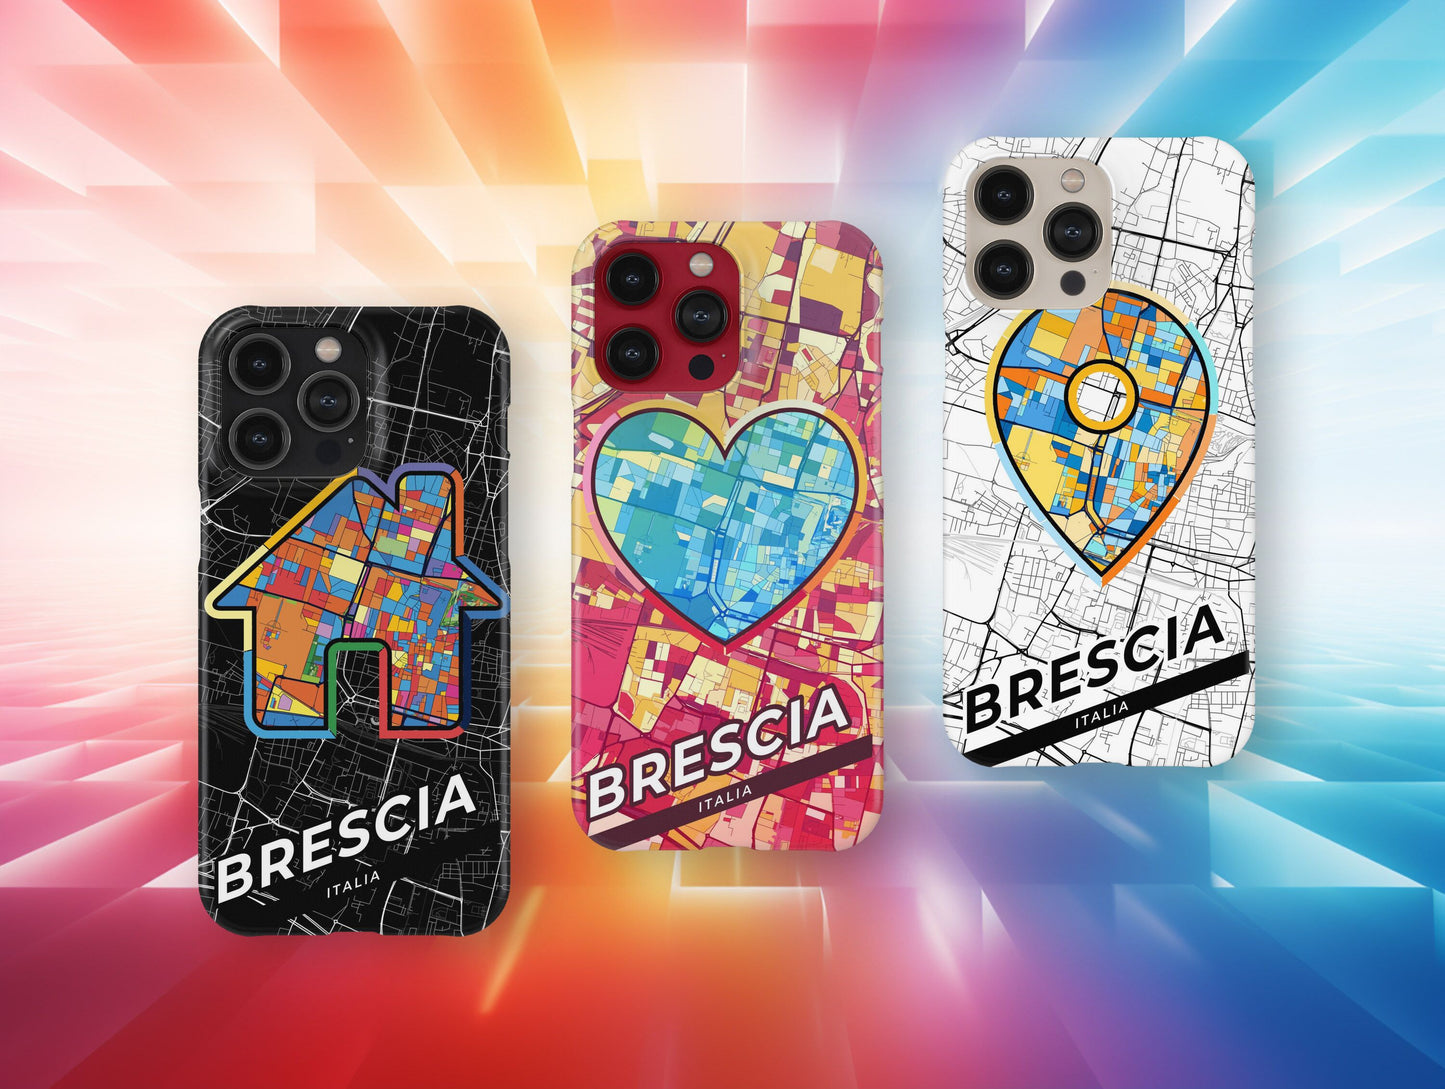 Brescia Italy slim phone case with colorful icon. Birthday, wedding or housewarming gift. Couple match cases.